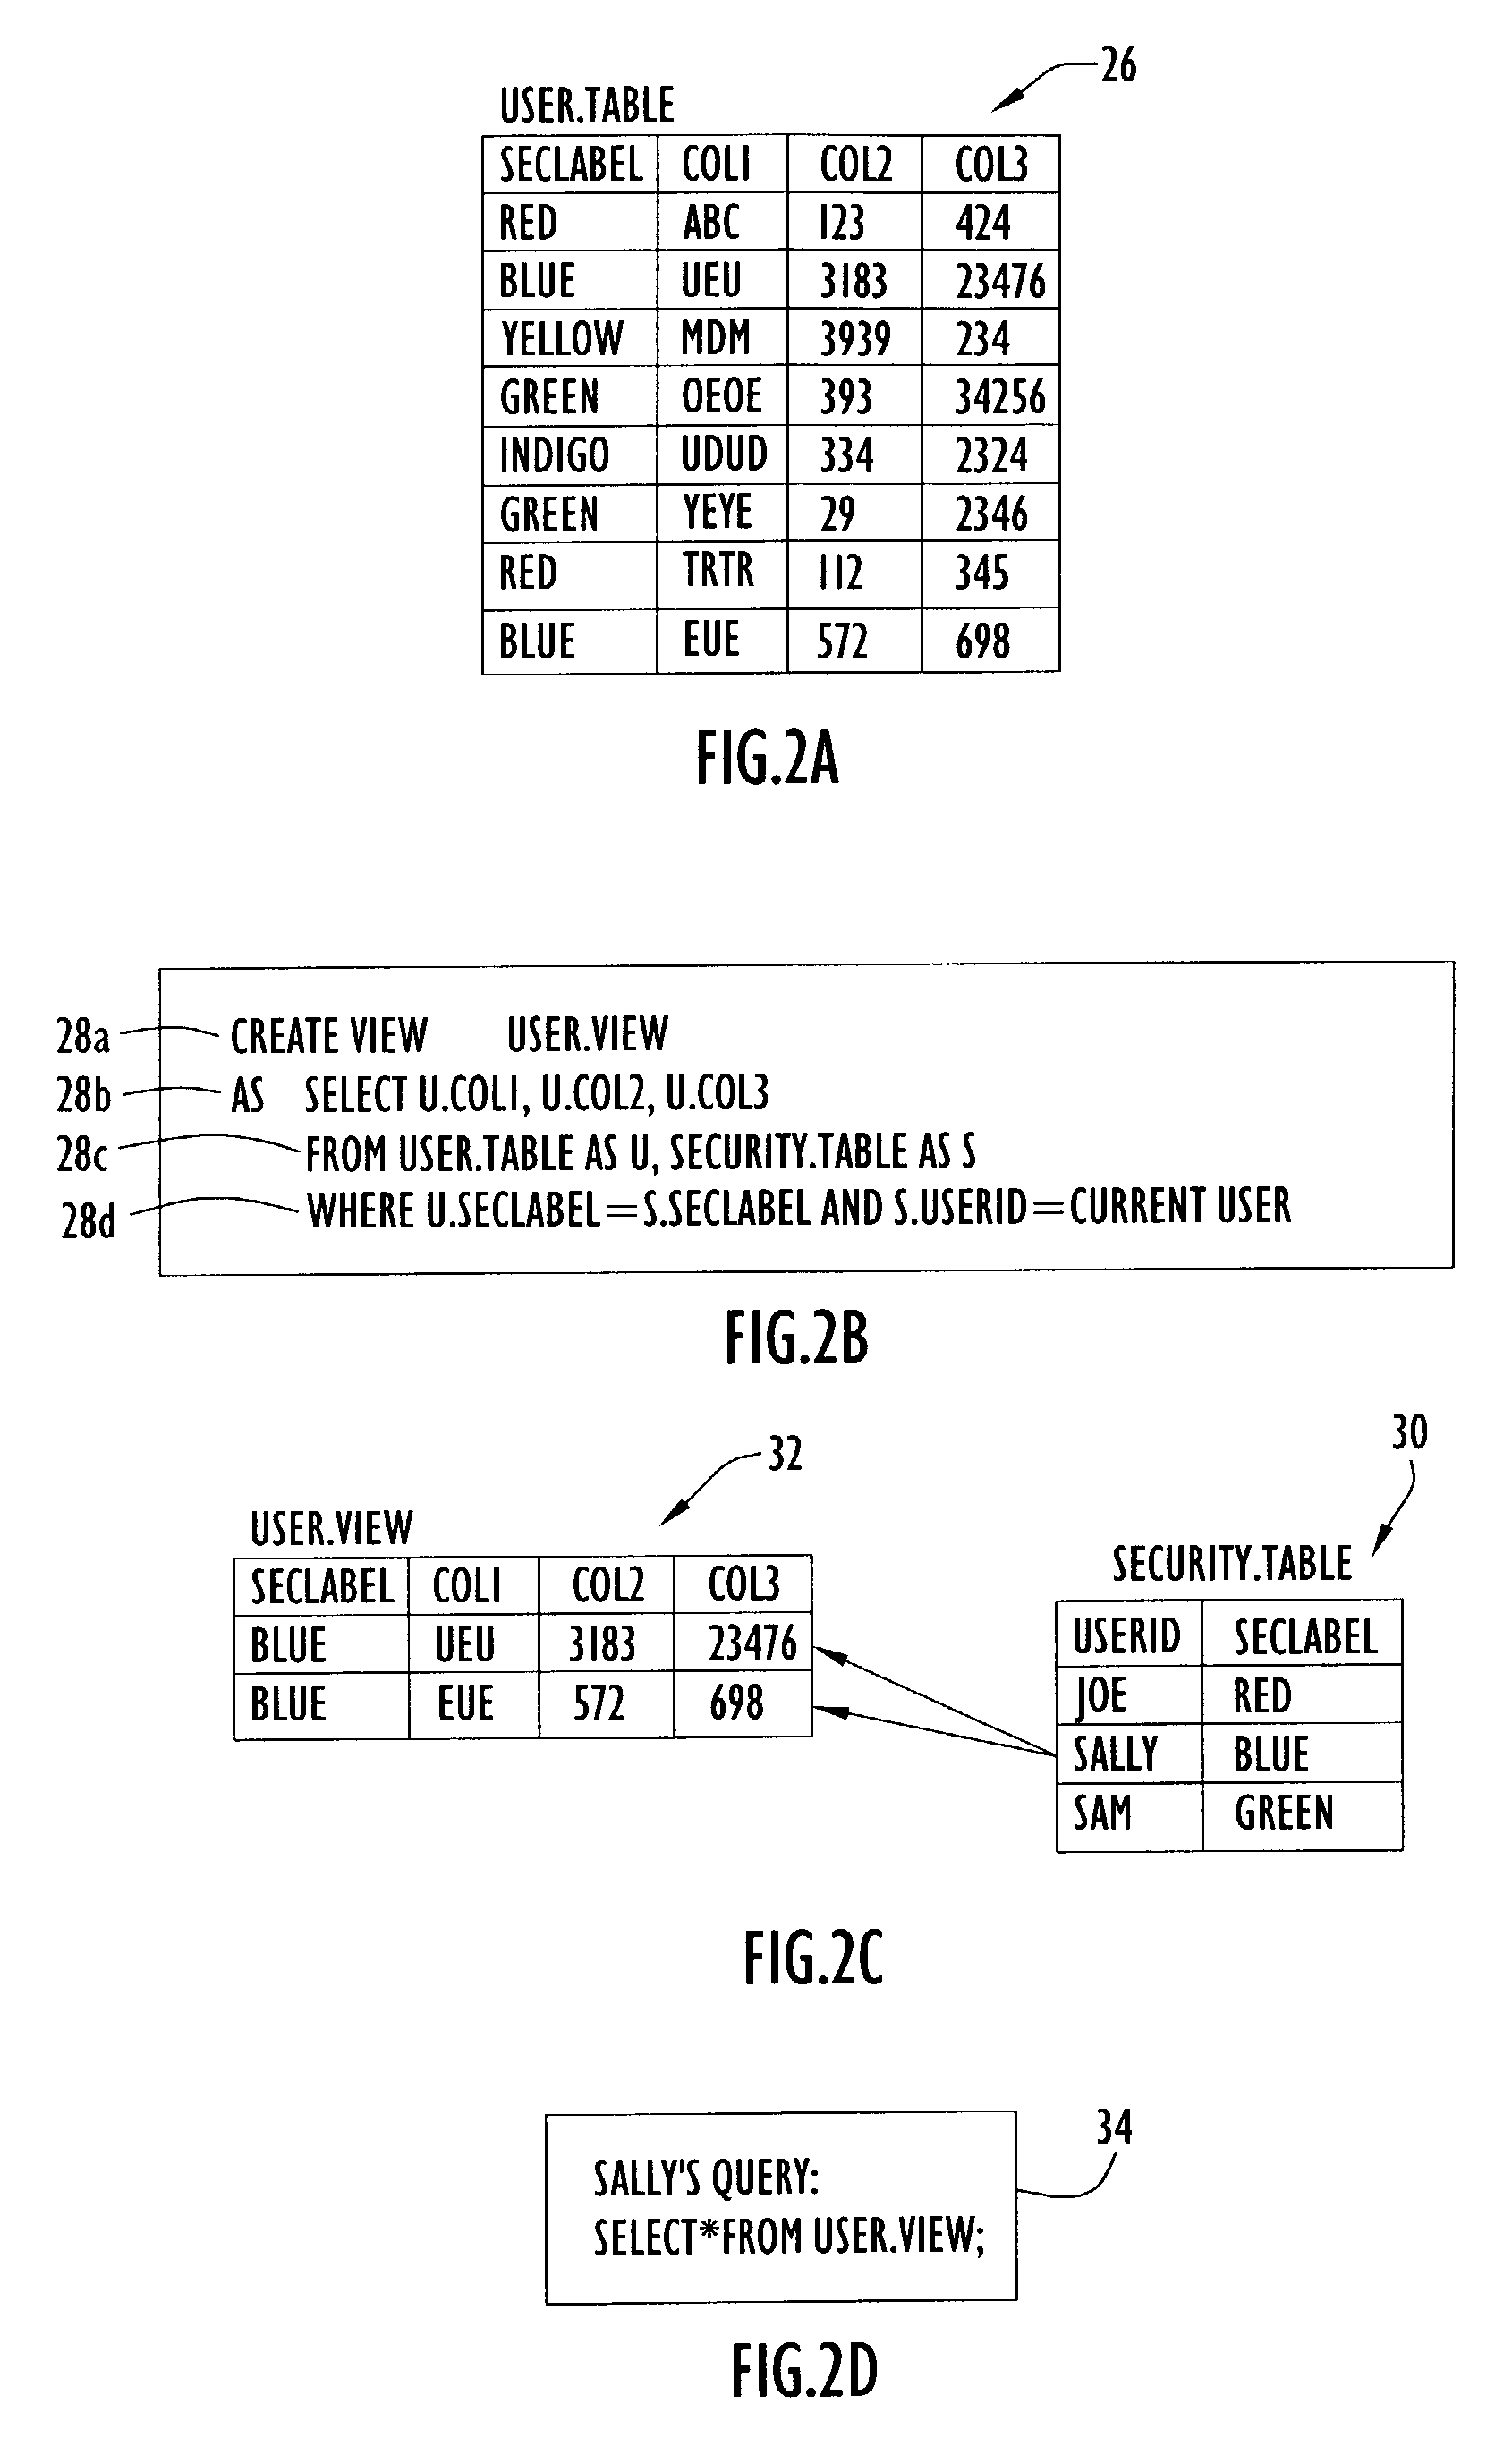 Row-level security in a relational database management system